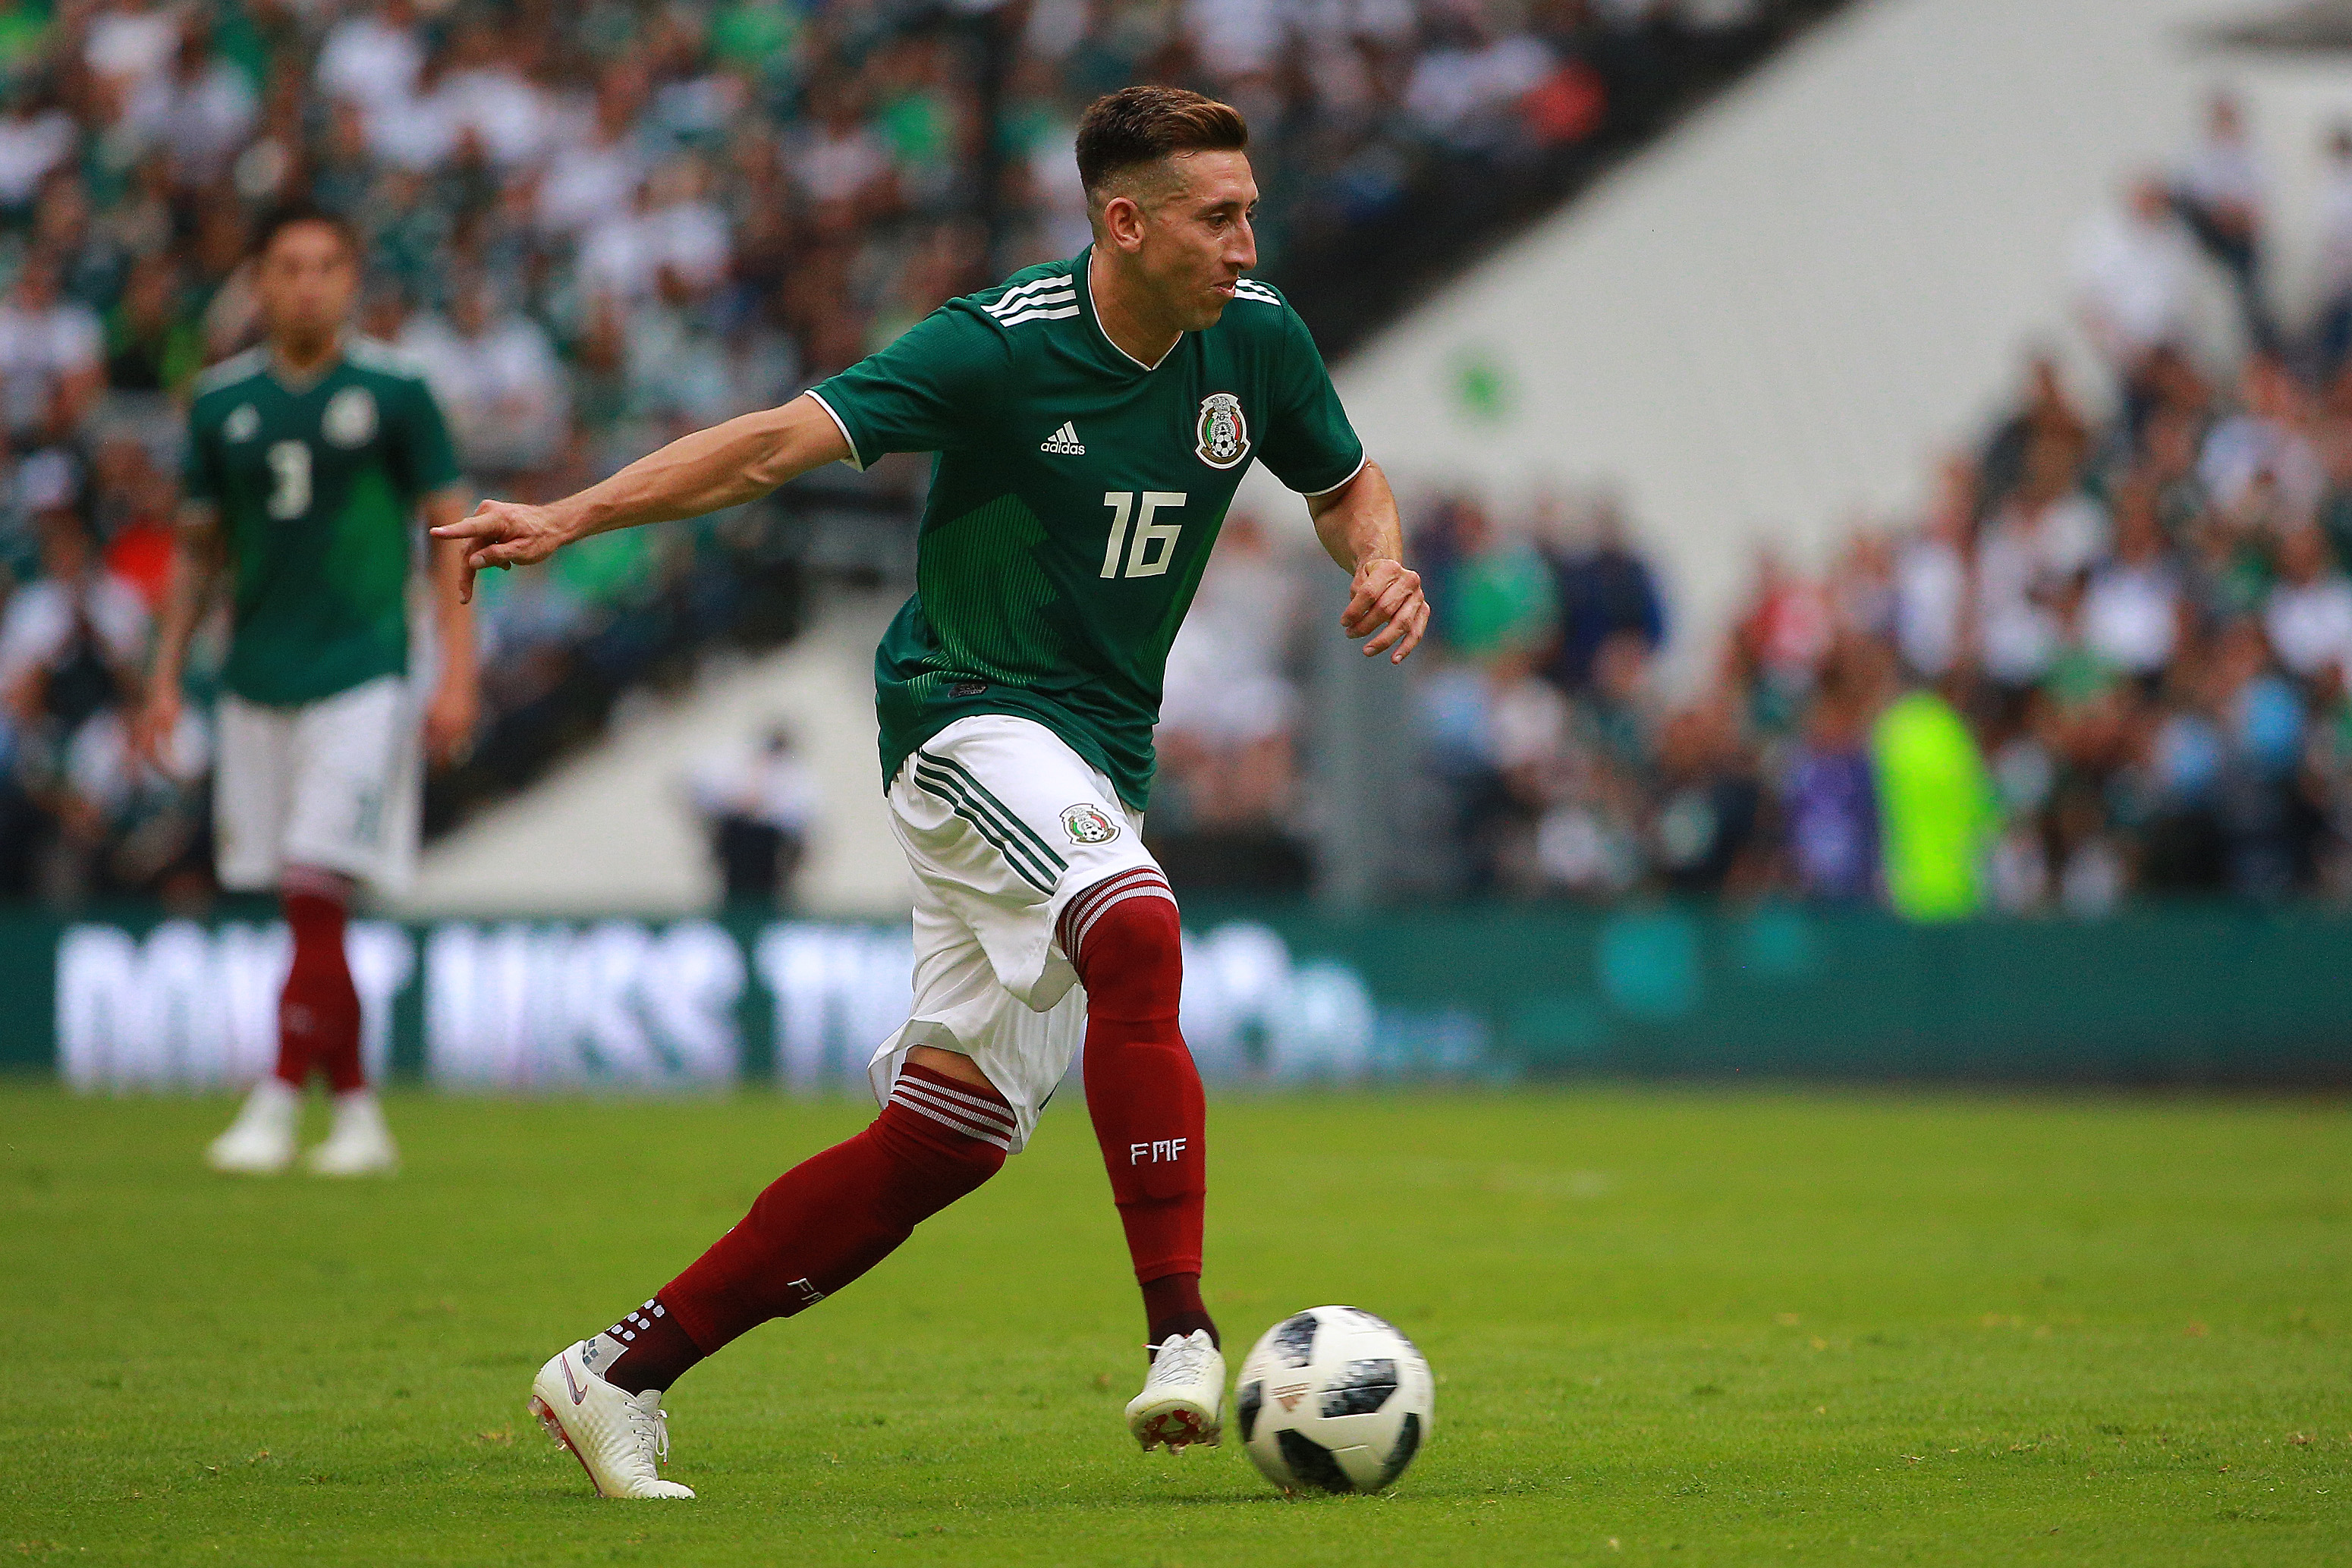 MEXICO CITY, MEXICO - JUNE 02: Hector Herrera of Mexico controls the ball during the International Friendly match between Mexico and Scotland at Estadio Azteca on June 2, 2018 in Mexico City, Mexico. (Photo by Manuel Velasquez/Getty Images)